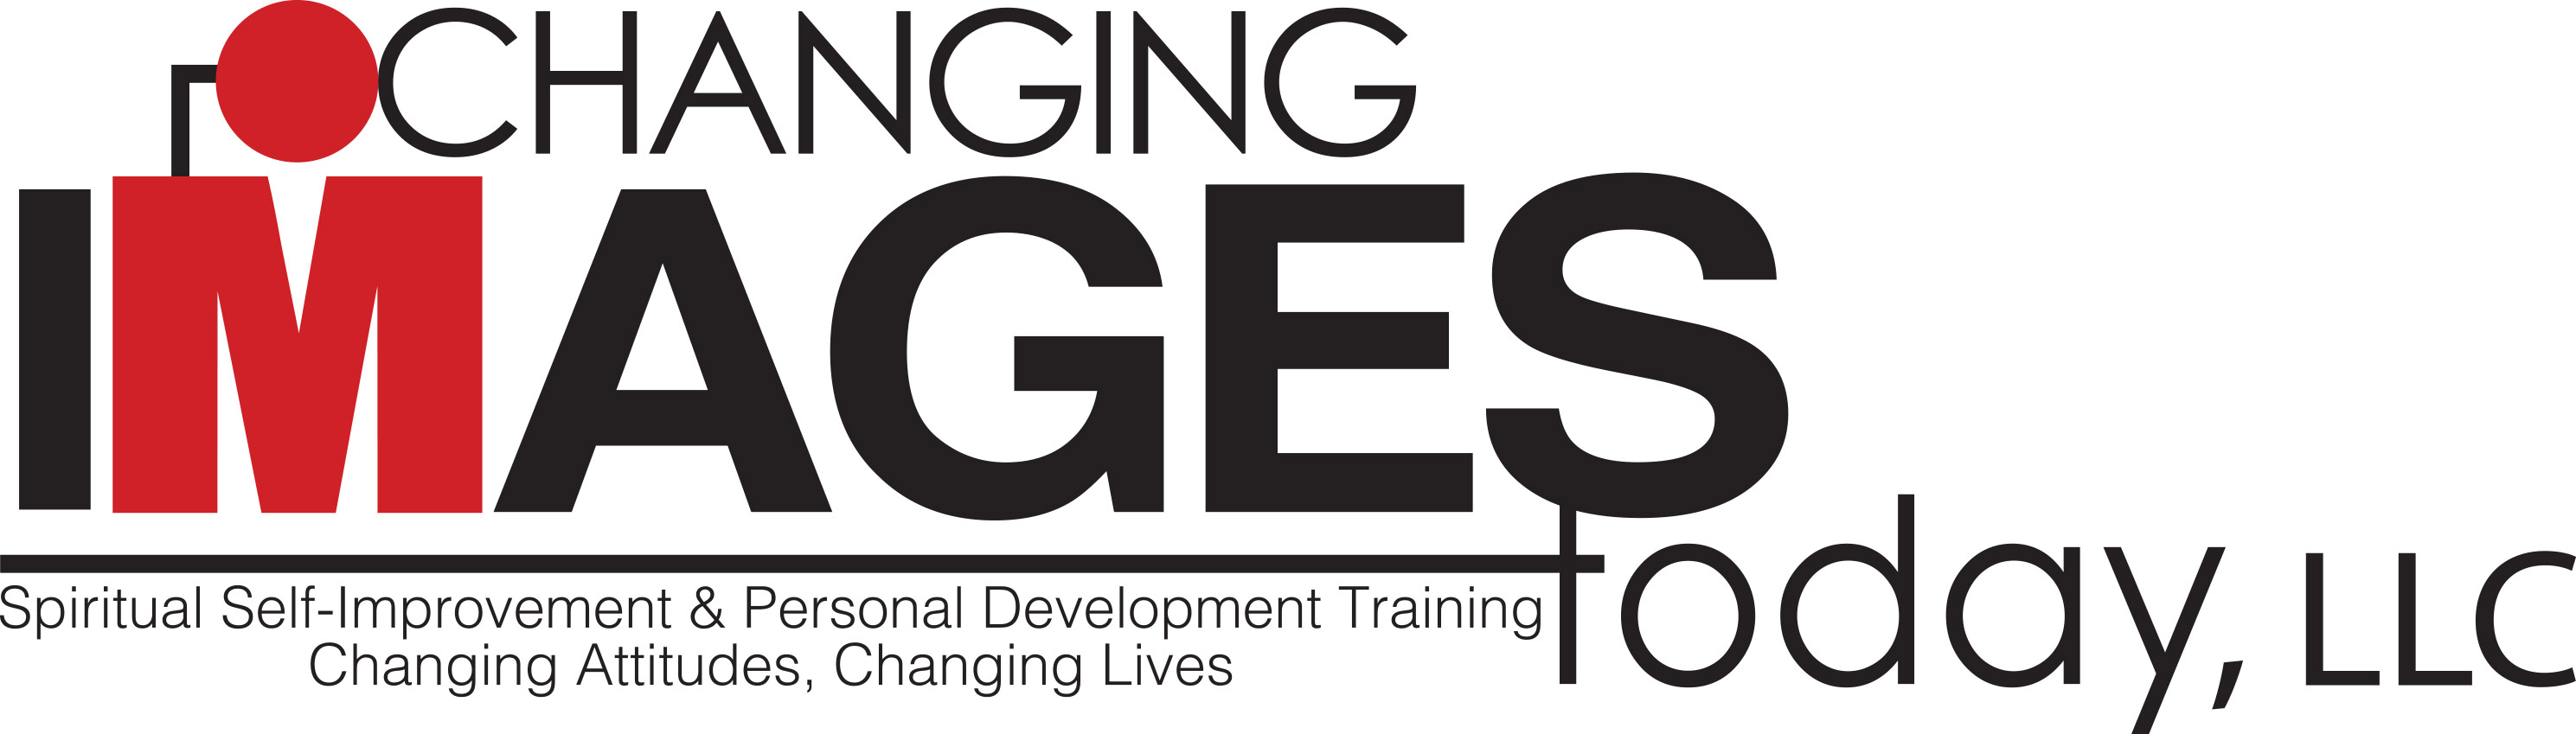 Changing Images Today logo